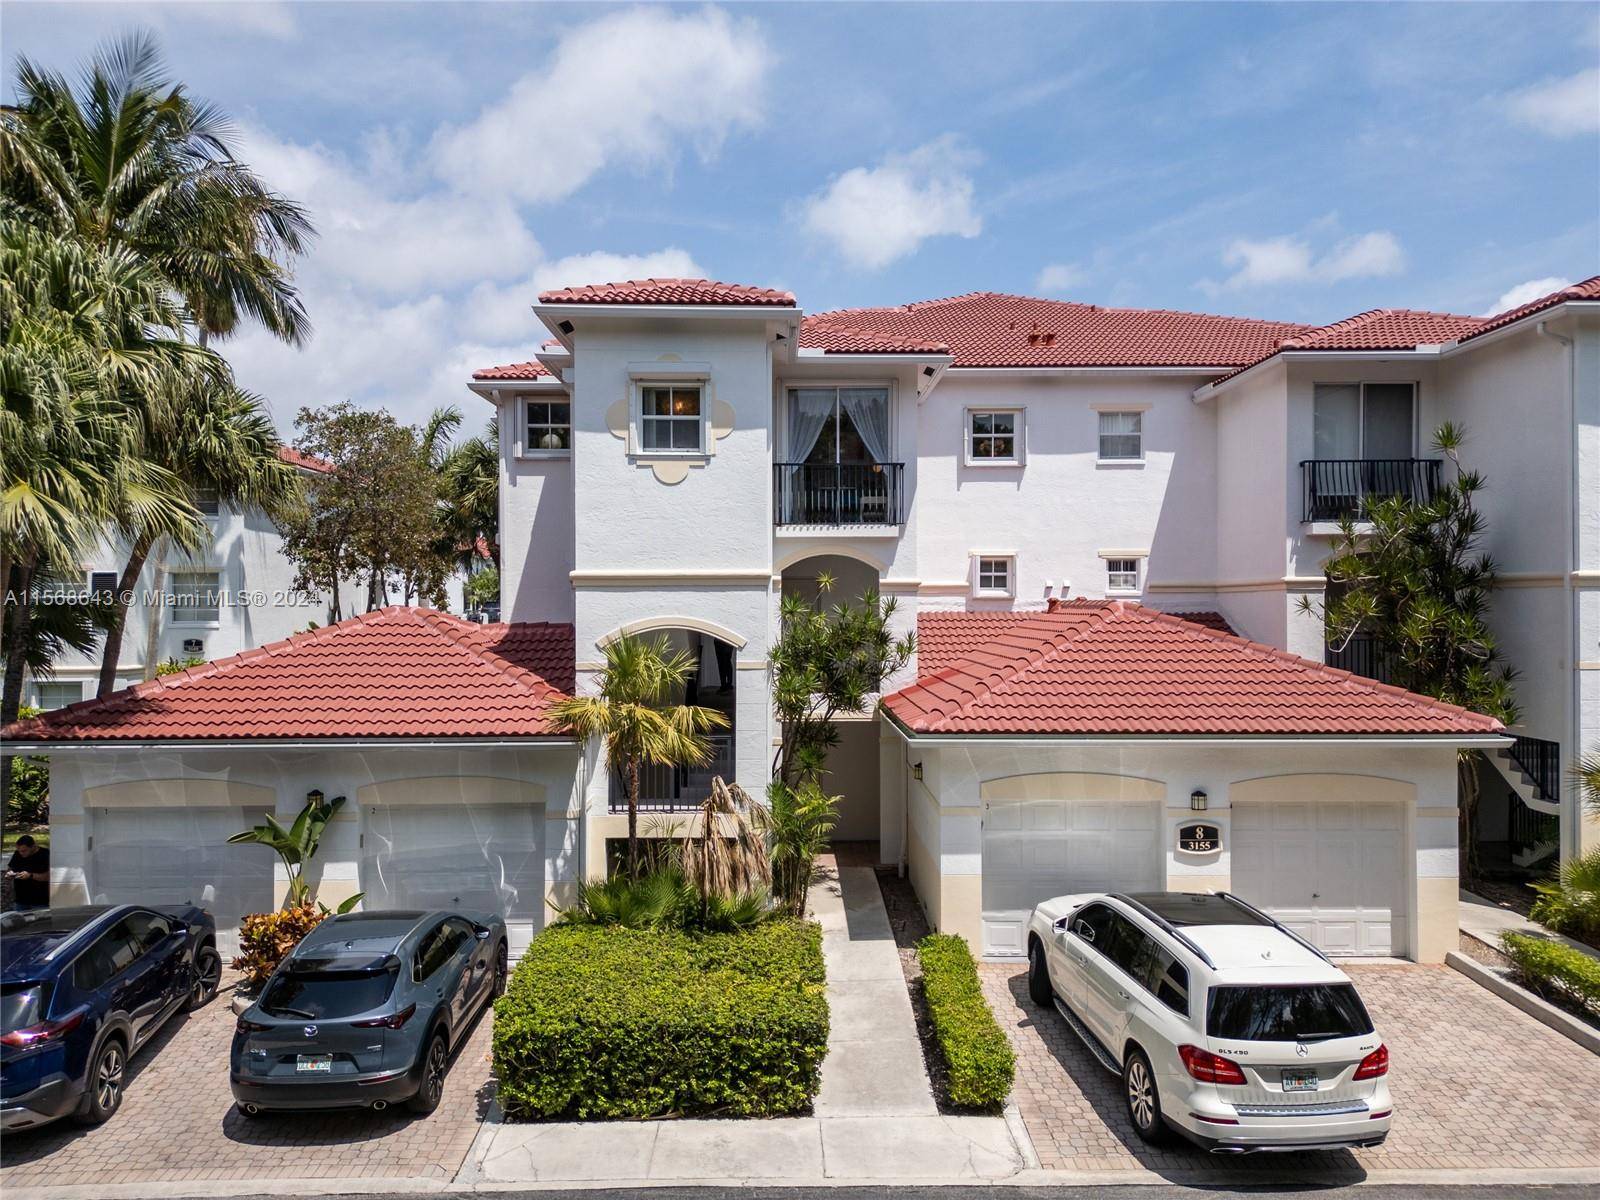 Welcome to your fully remodeled 1 1 sanctuary nestled in one of Aventura's prestigious gated communities.